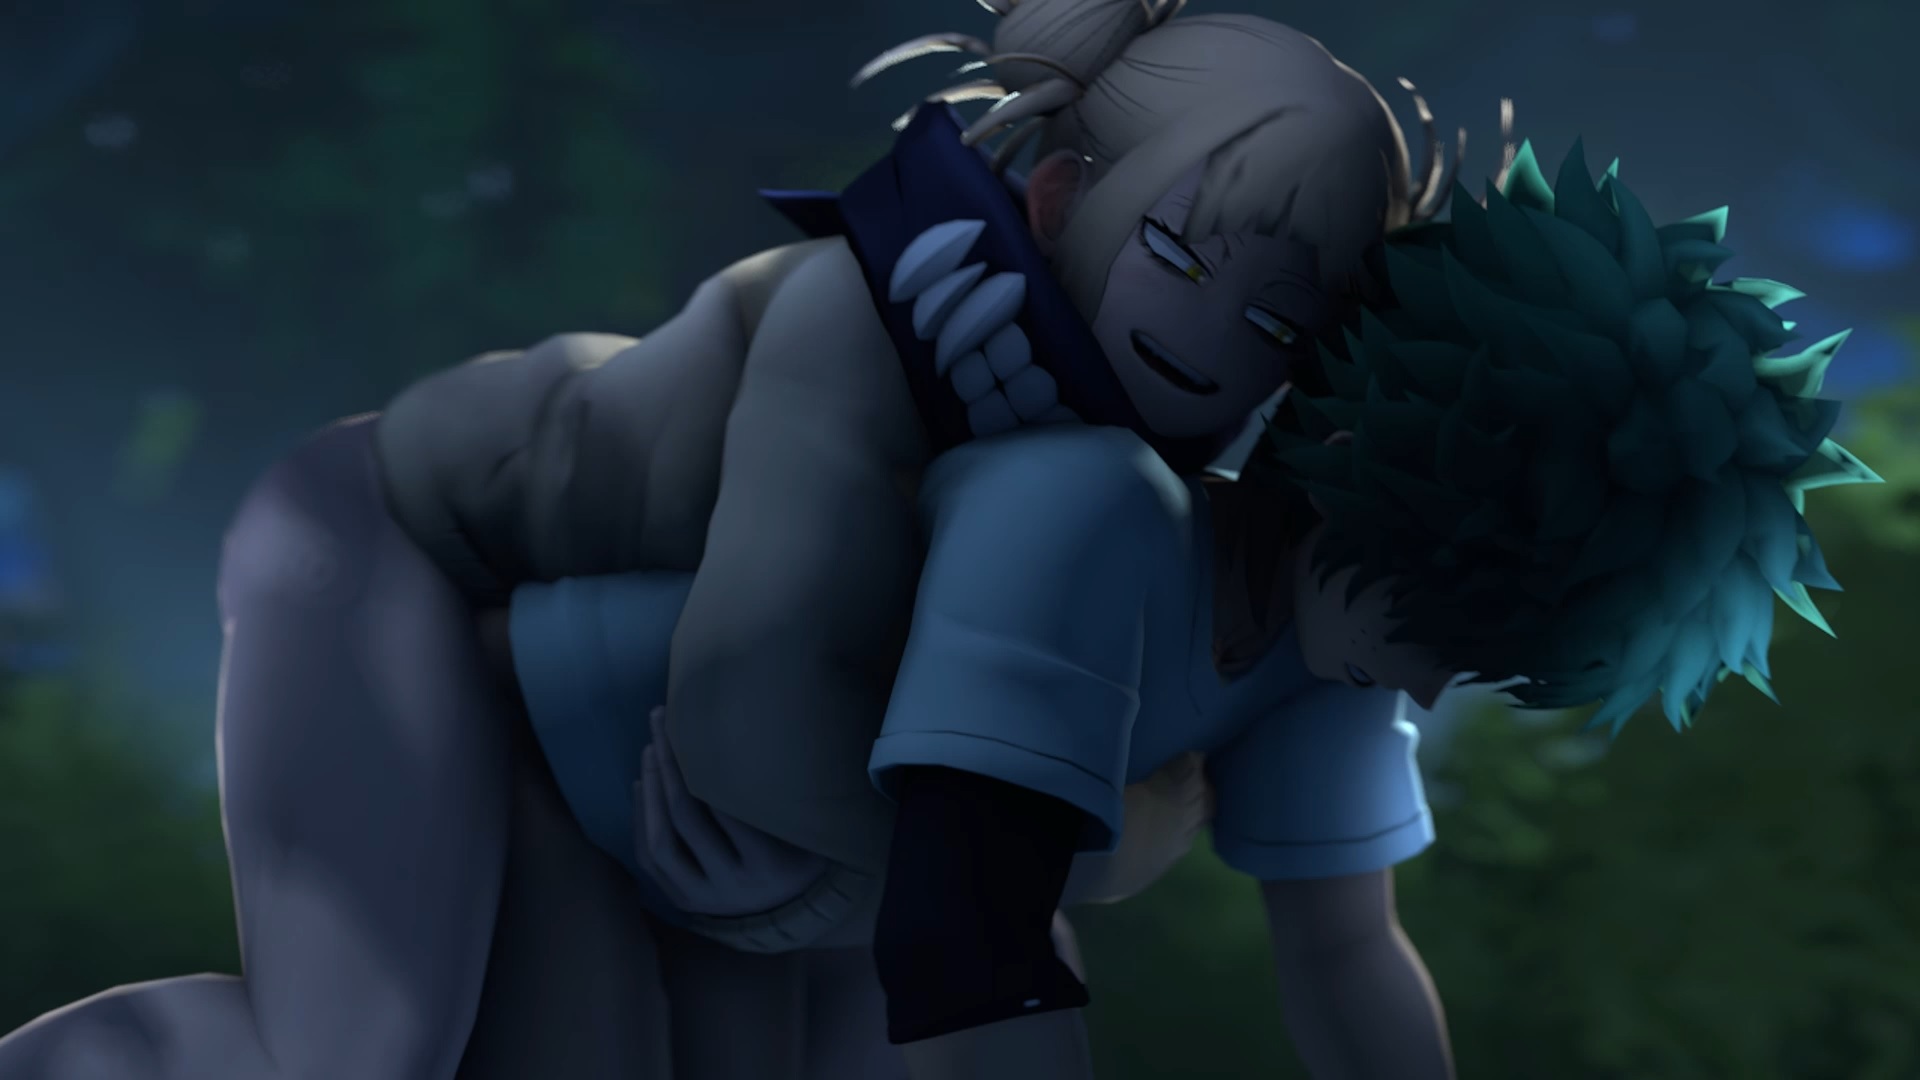 Toga and deku by greatm8